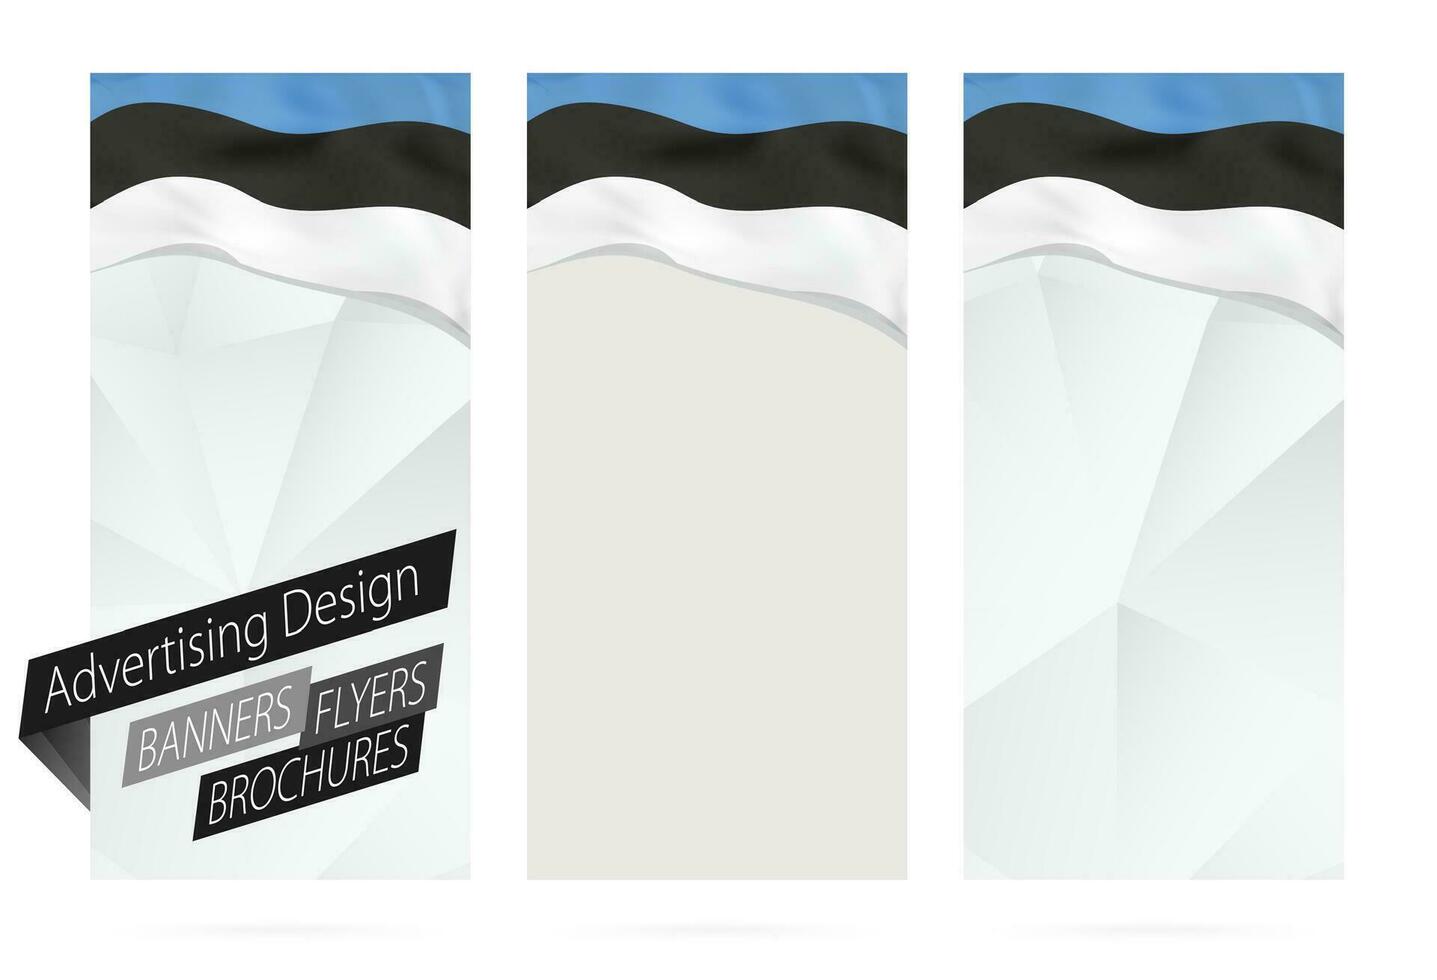 Design of banners, flyers, brochures with flag of Estonia. vector